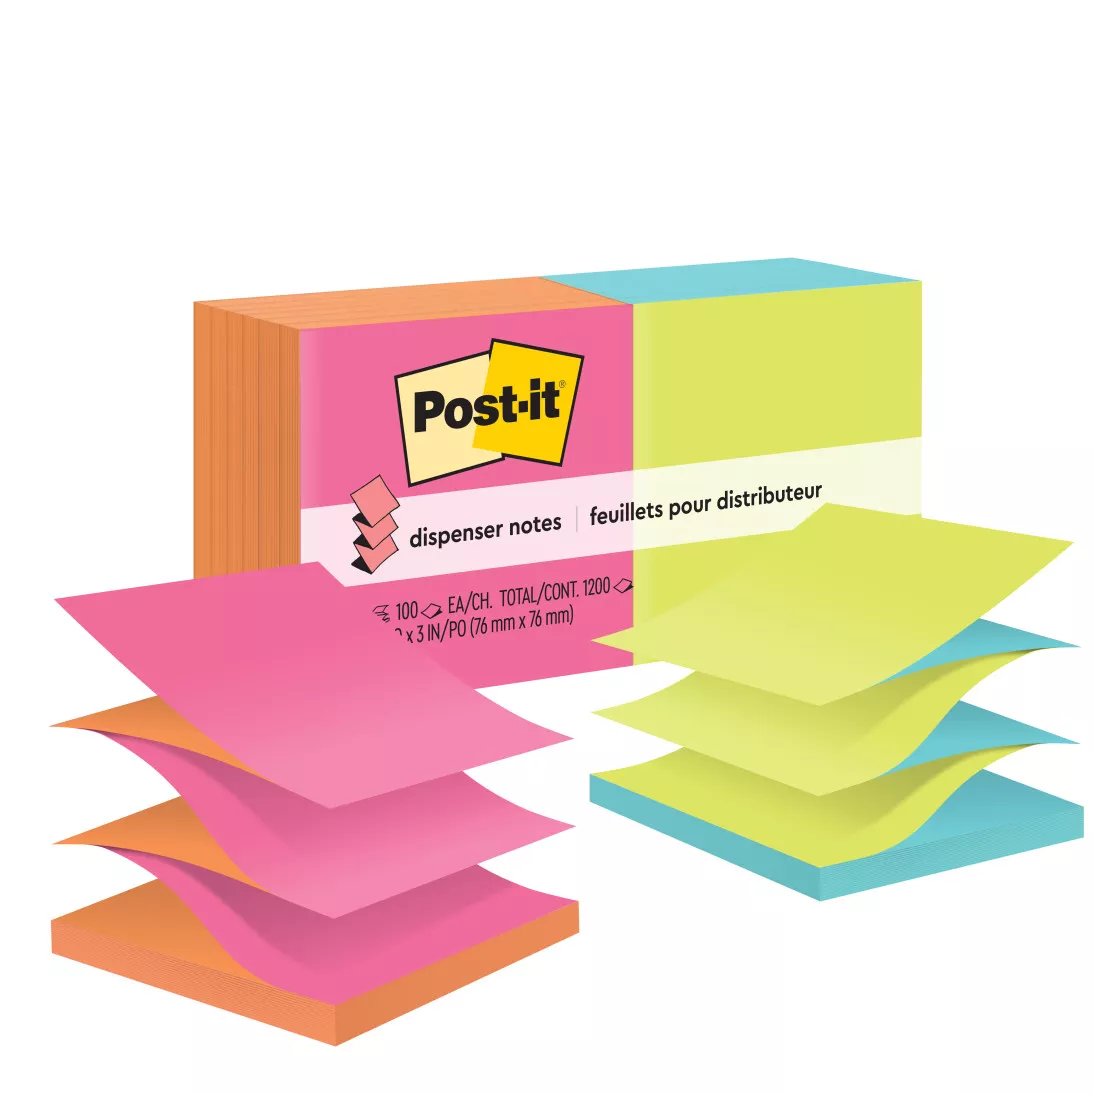 Post-it® Pop-up Notes R330-N-ALT, 3 in x 3 in (76 mm x 76 mm) Cape Town
Collection